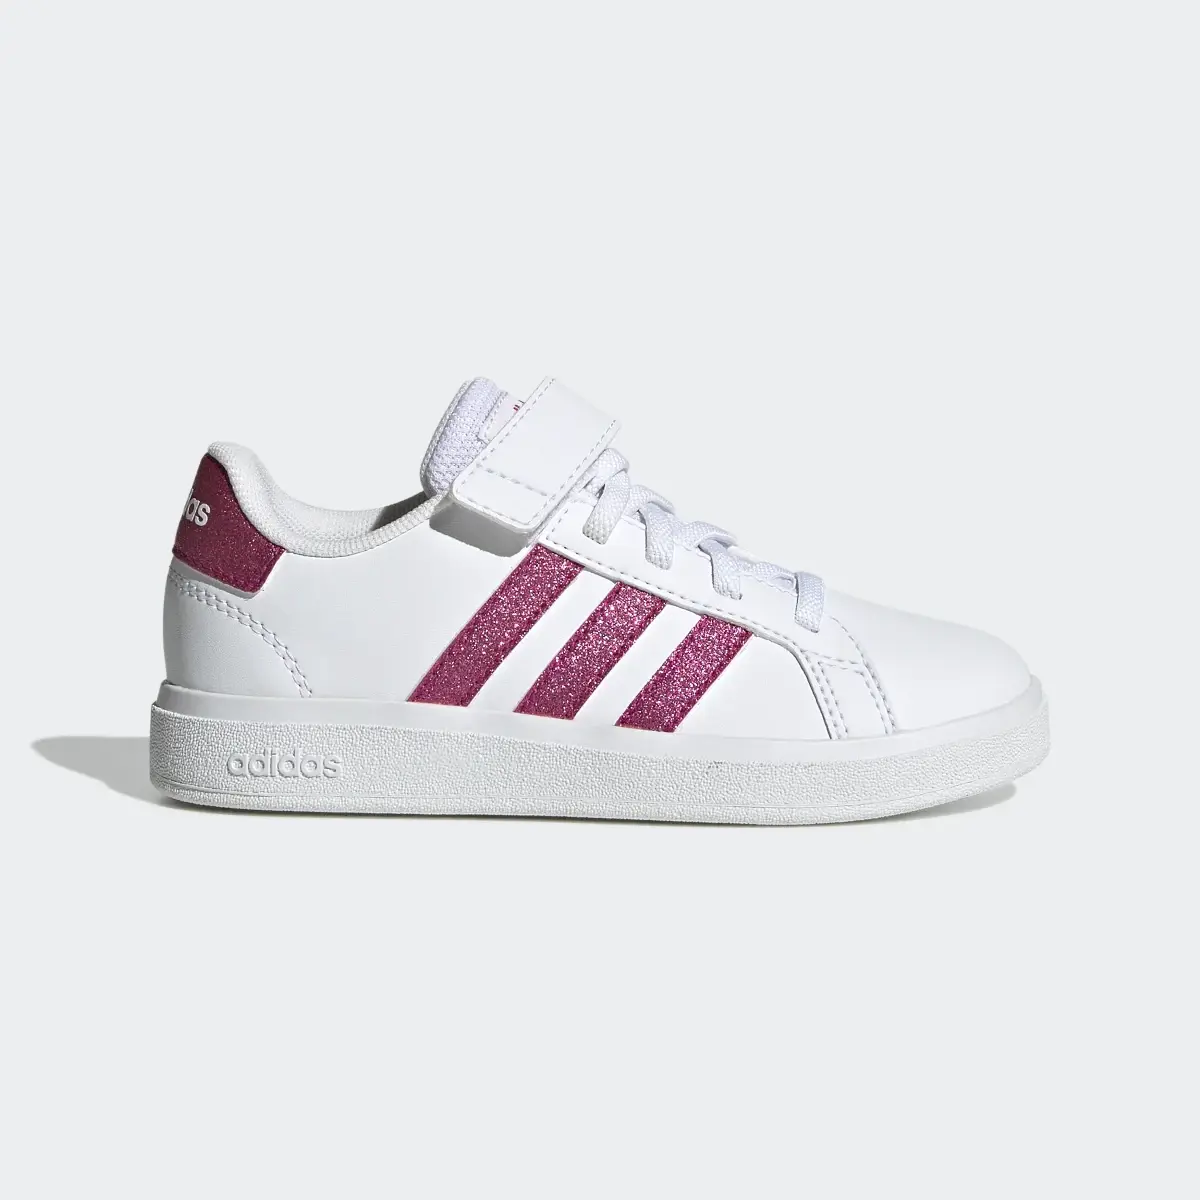 Adidas Grand Court Court Elastic Lace and Top Strap Shoes. 2